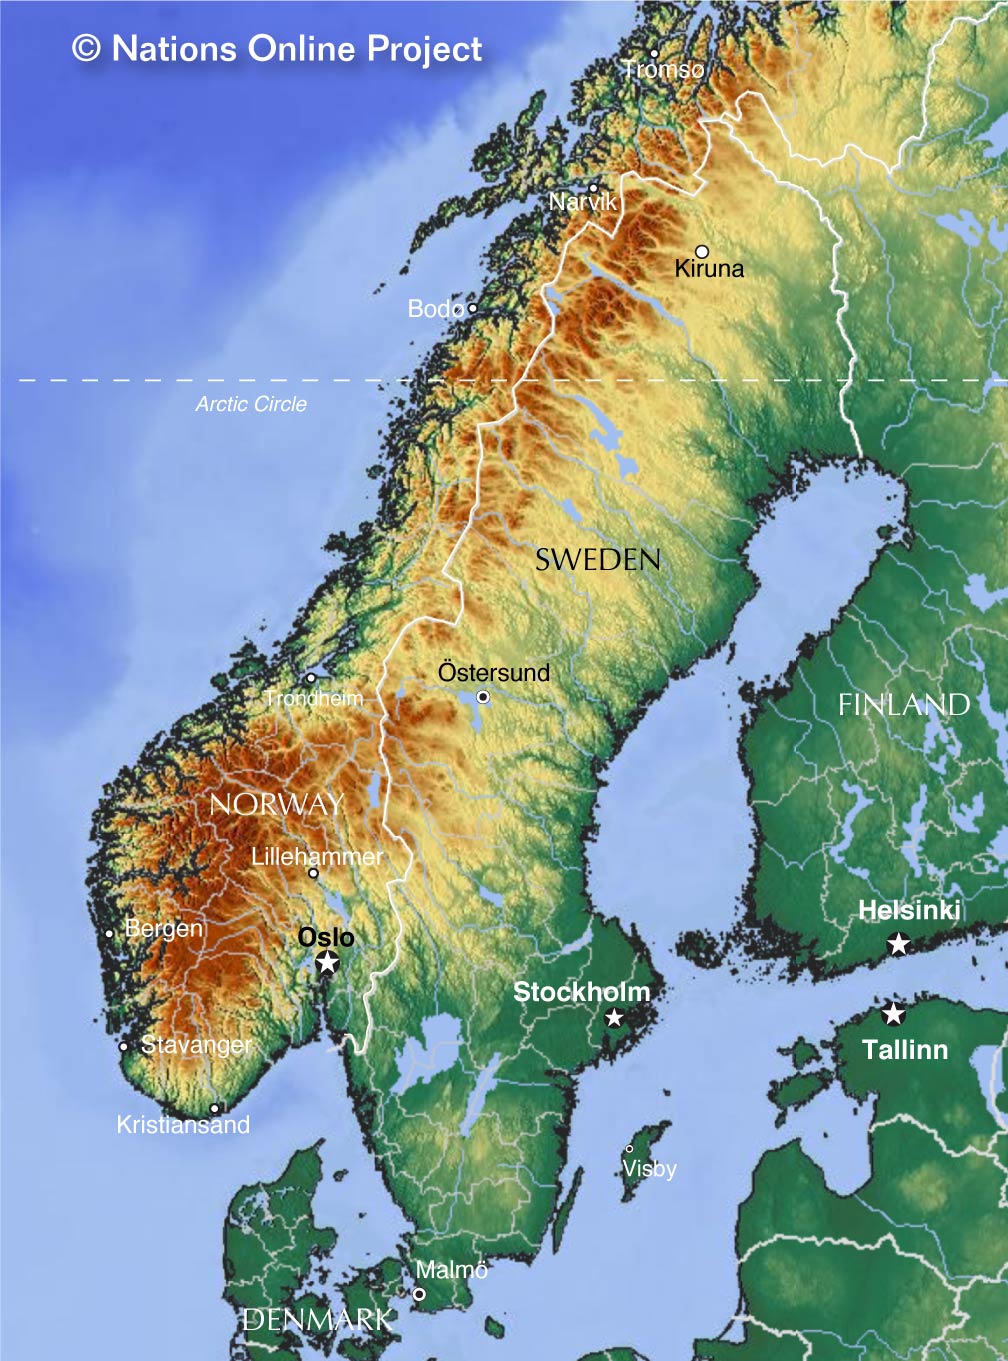 Topographic map of the Scandinavian Peninsula showing Sweden and Norway